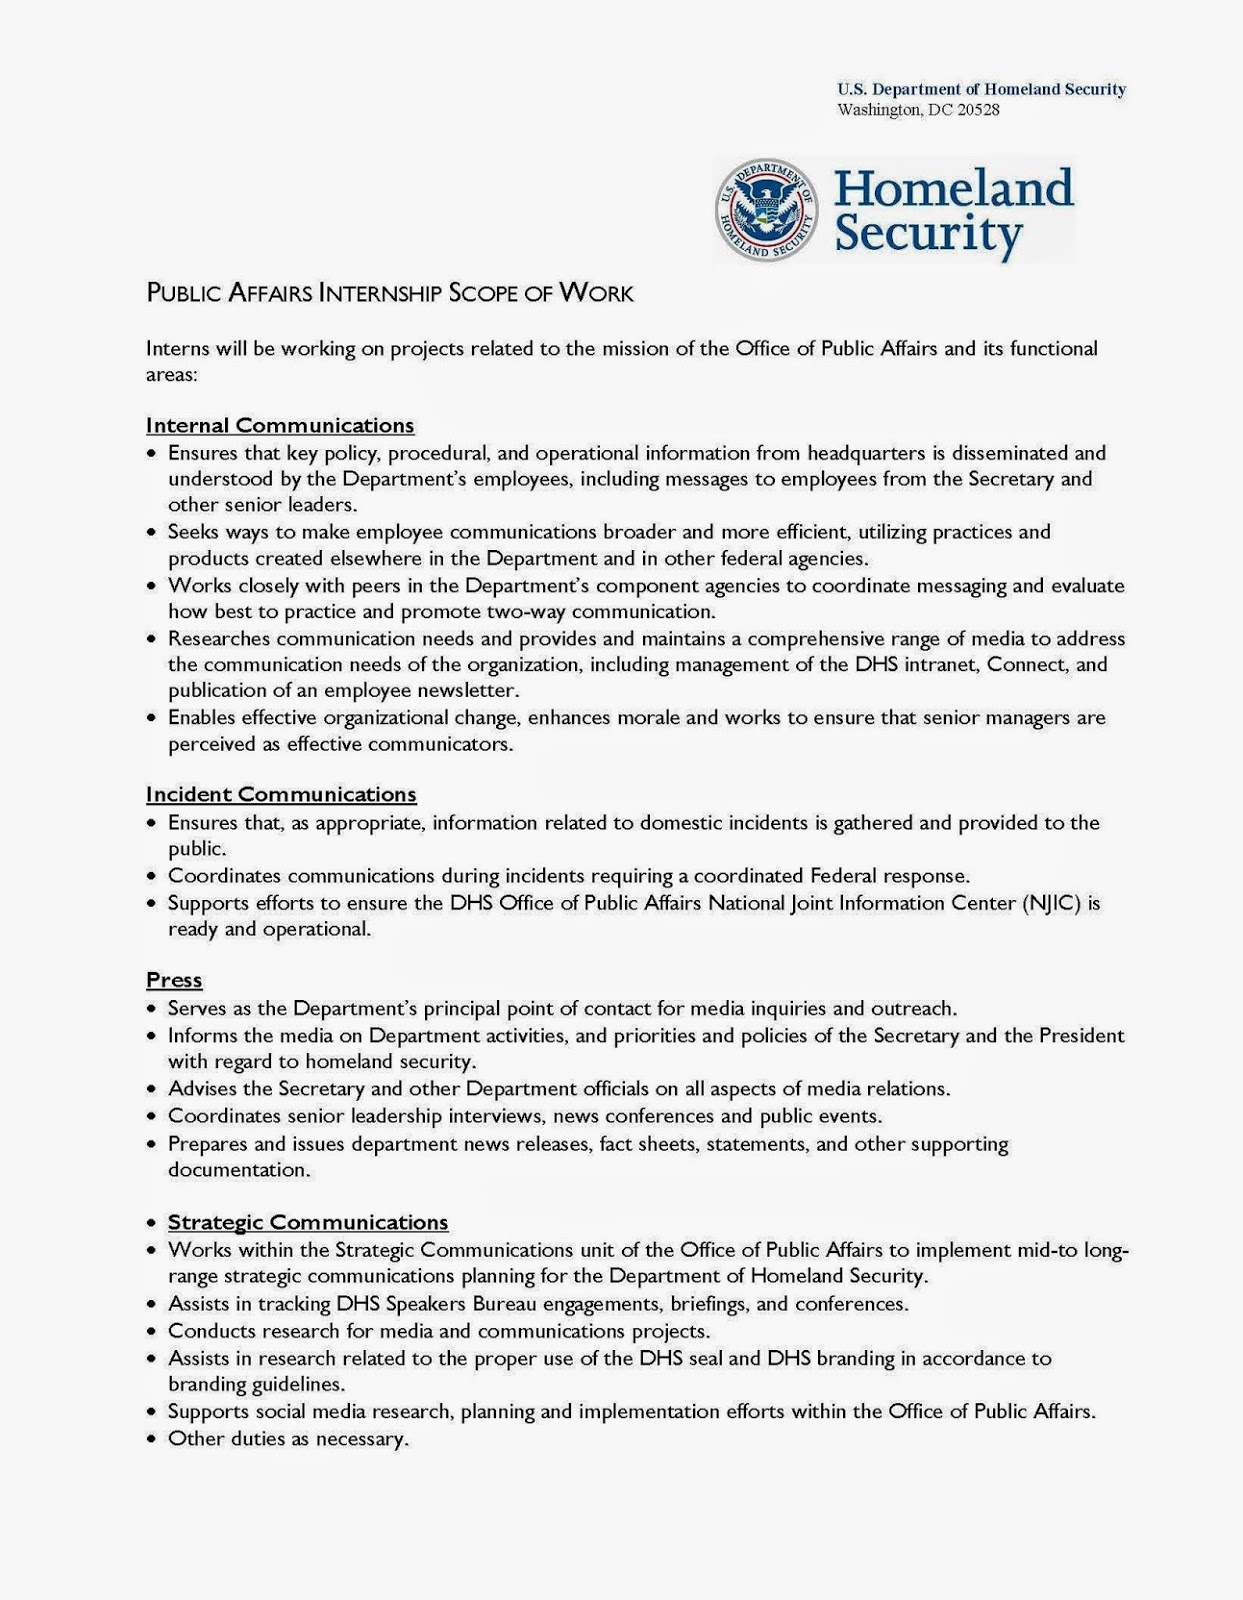 CCJSUSG News and Updates U.S. Department of Homeland Security’s (DHS